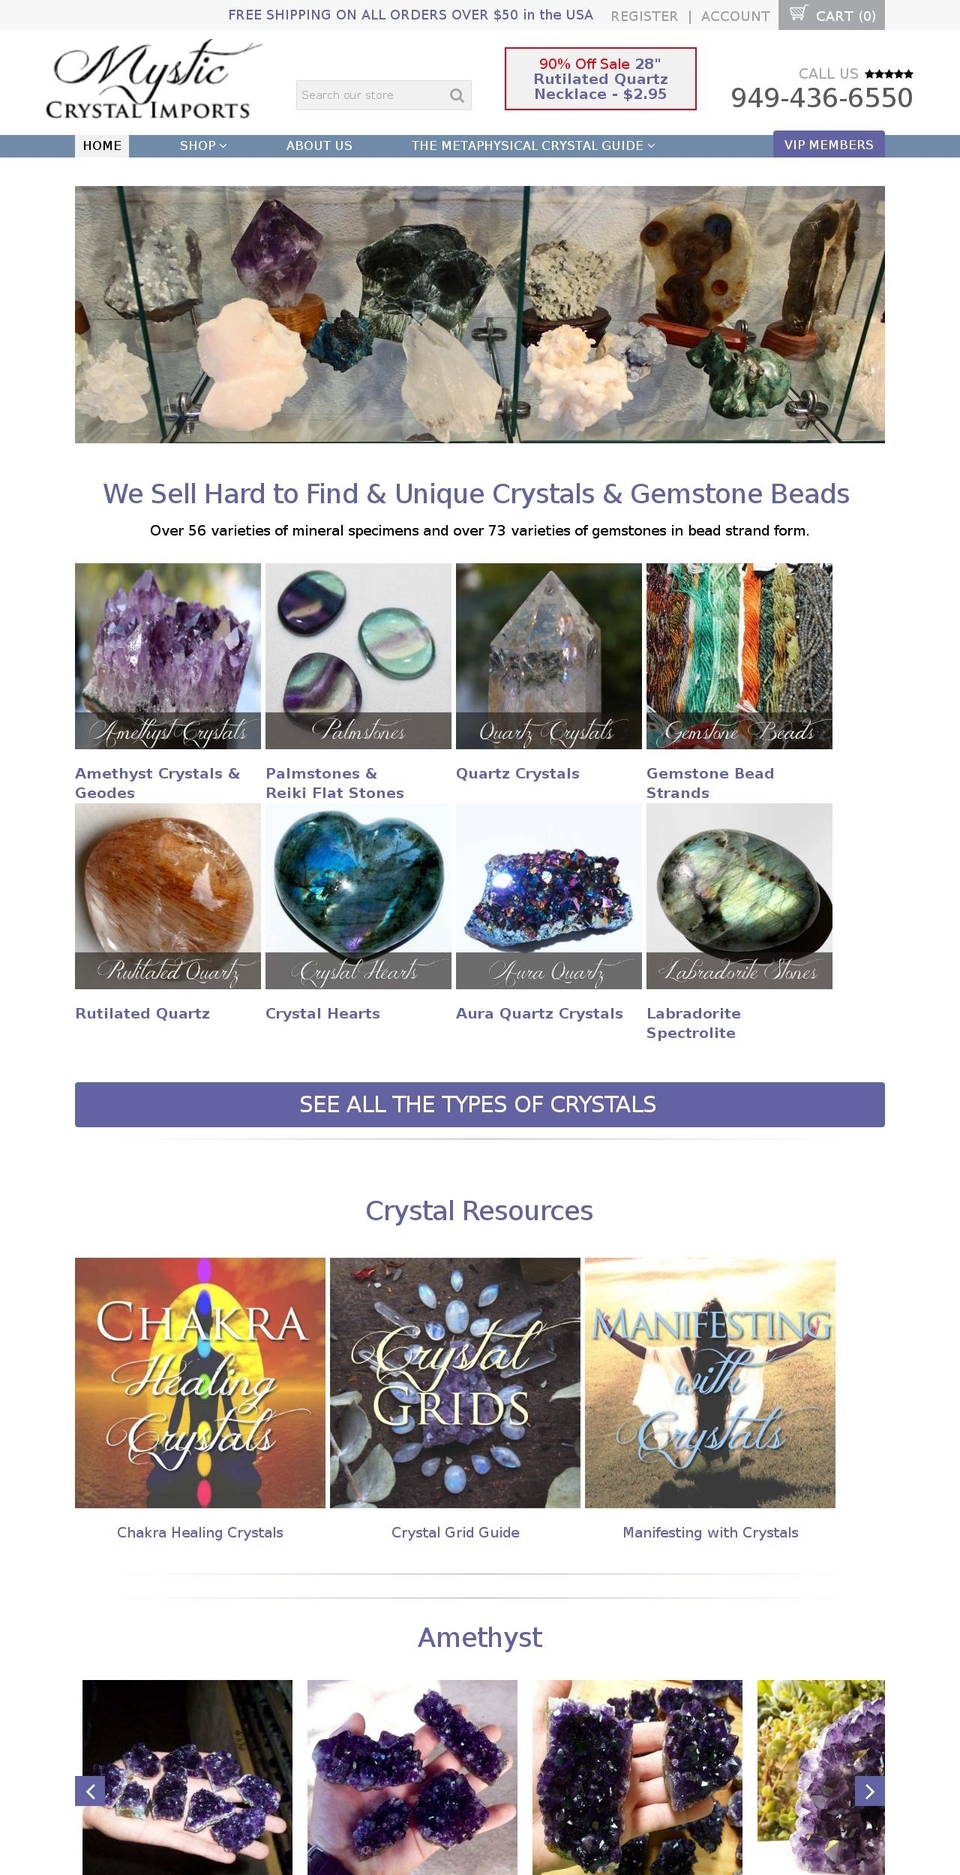 Shella Shopify theme site example mysticcrystalimports.com